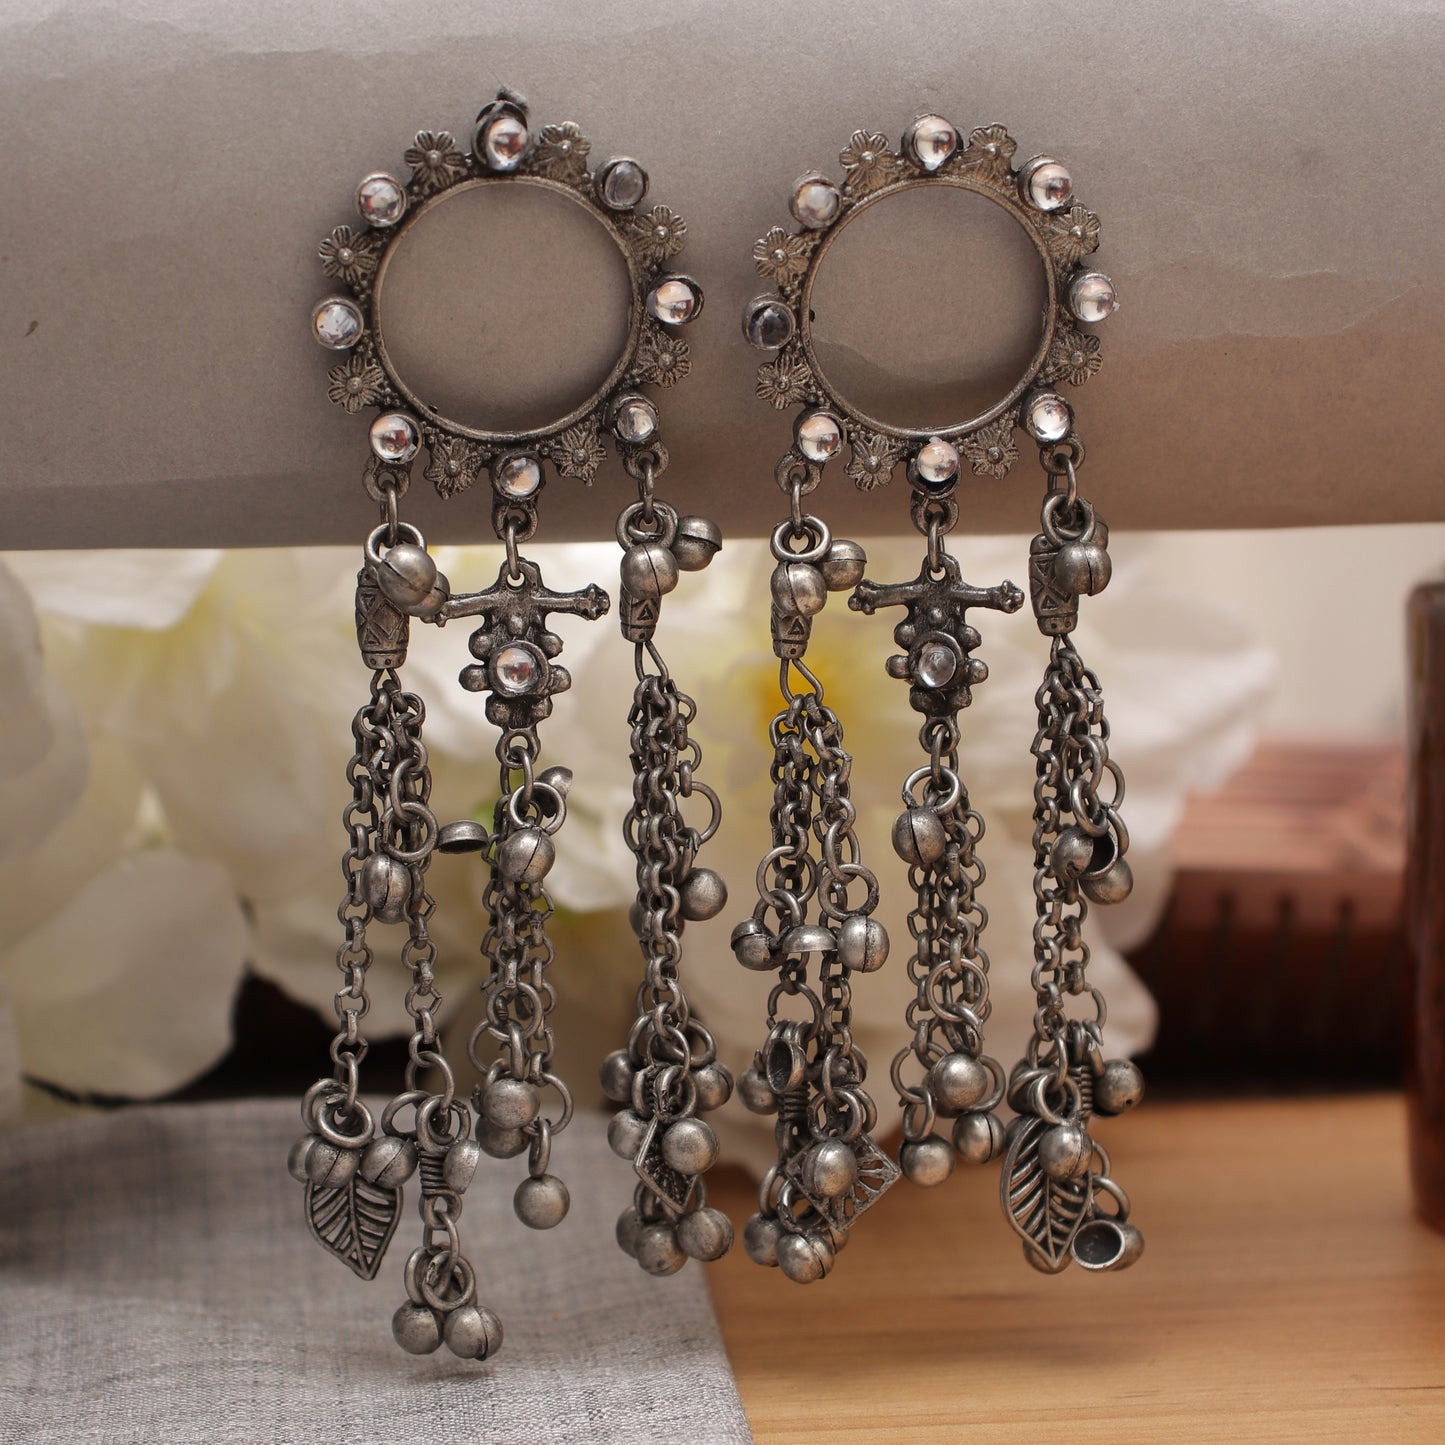 Antique Silver Finish Gracious Inky Trinky Earrings